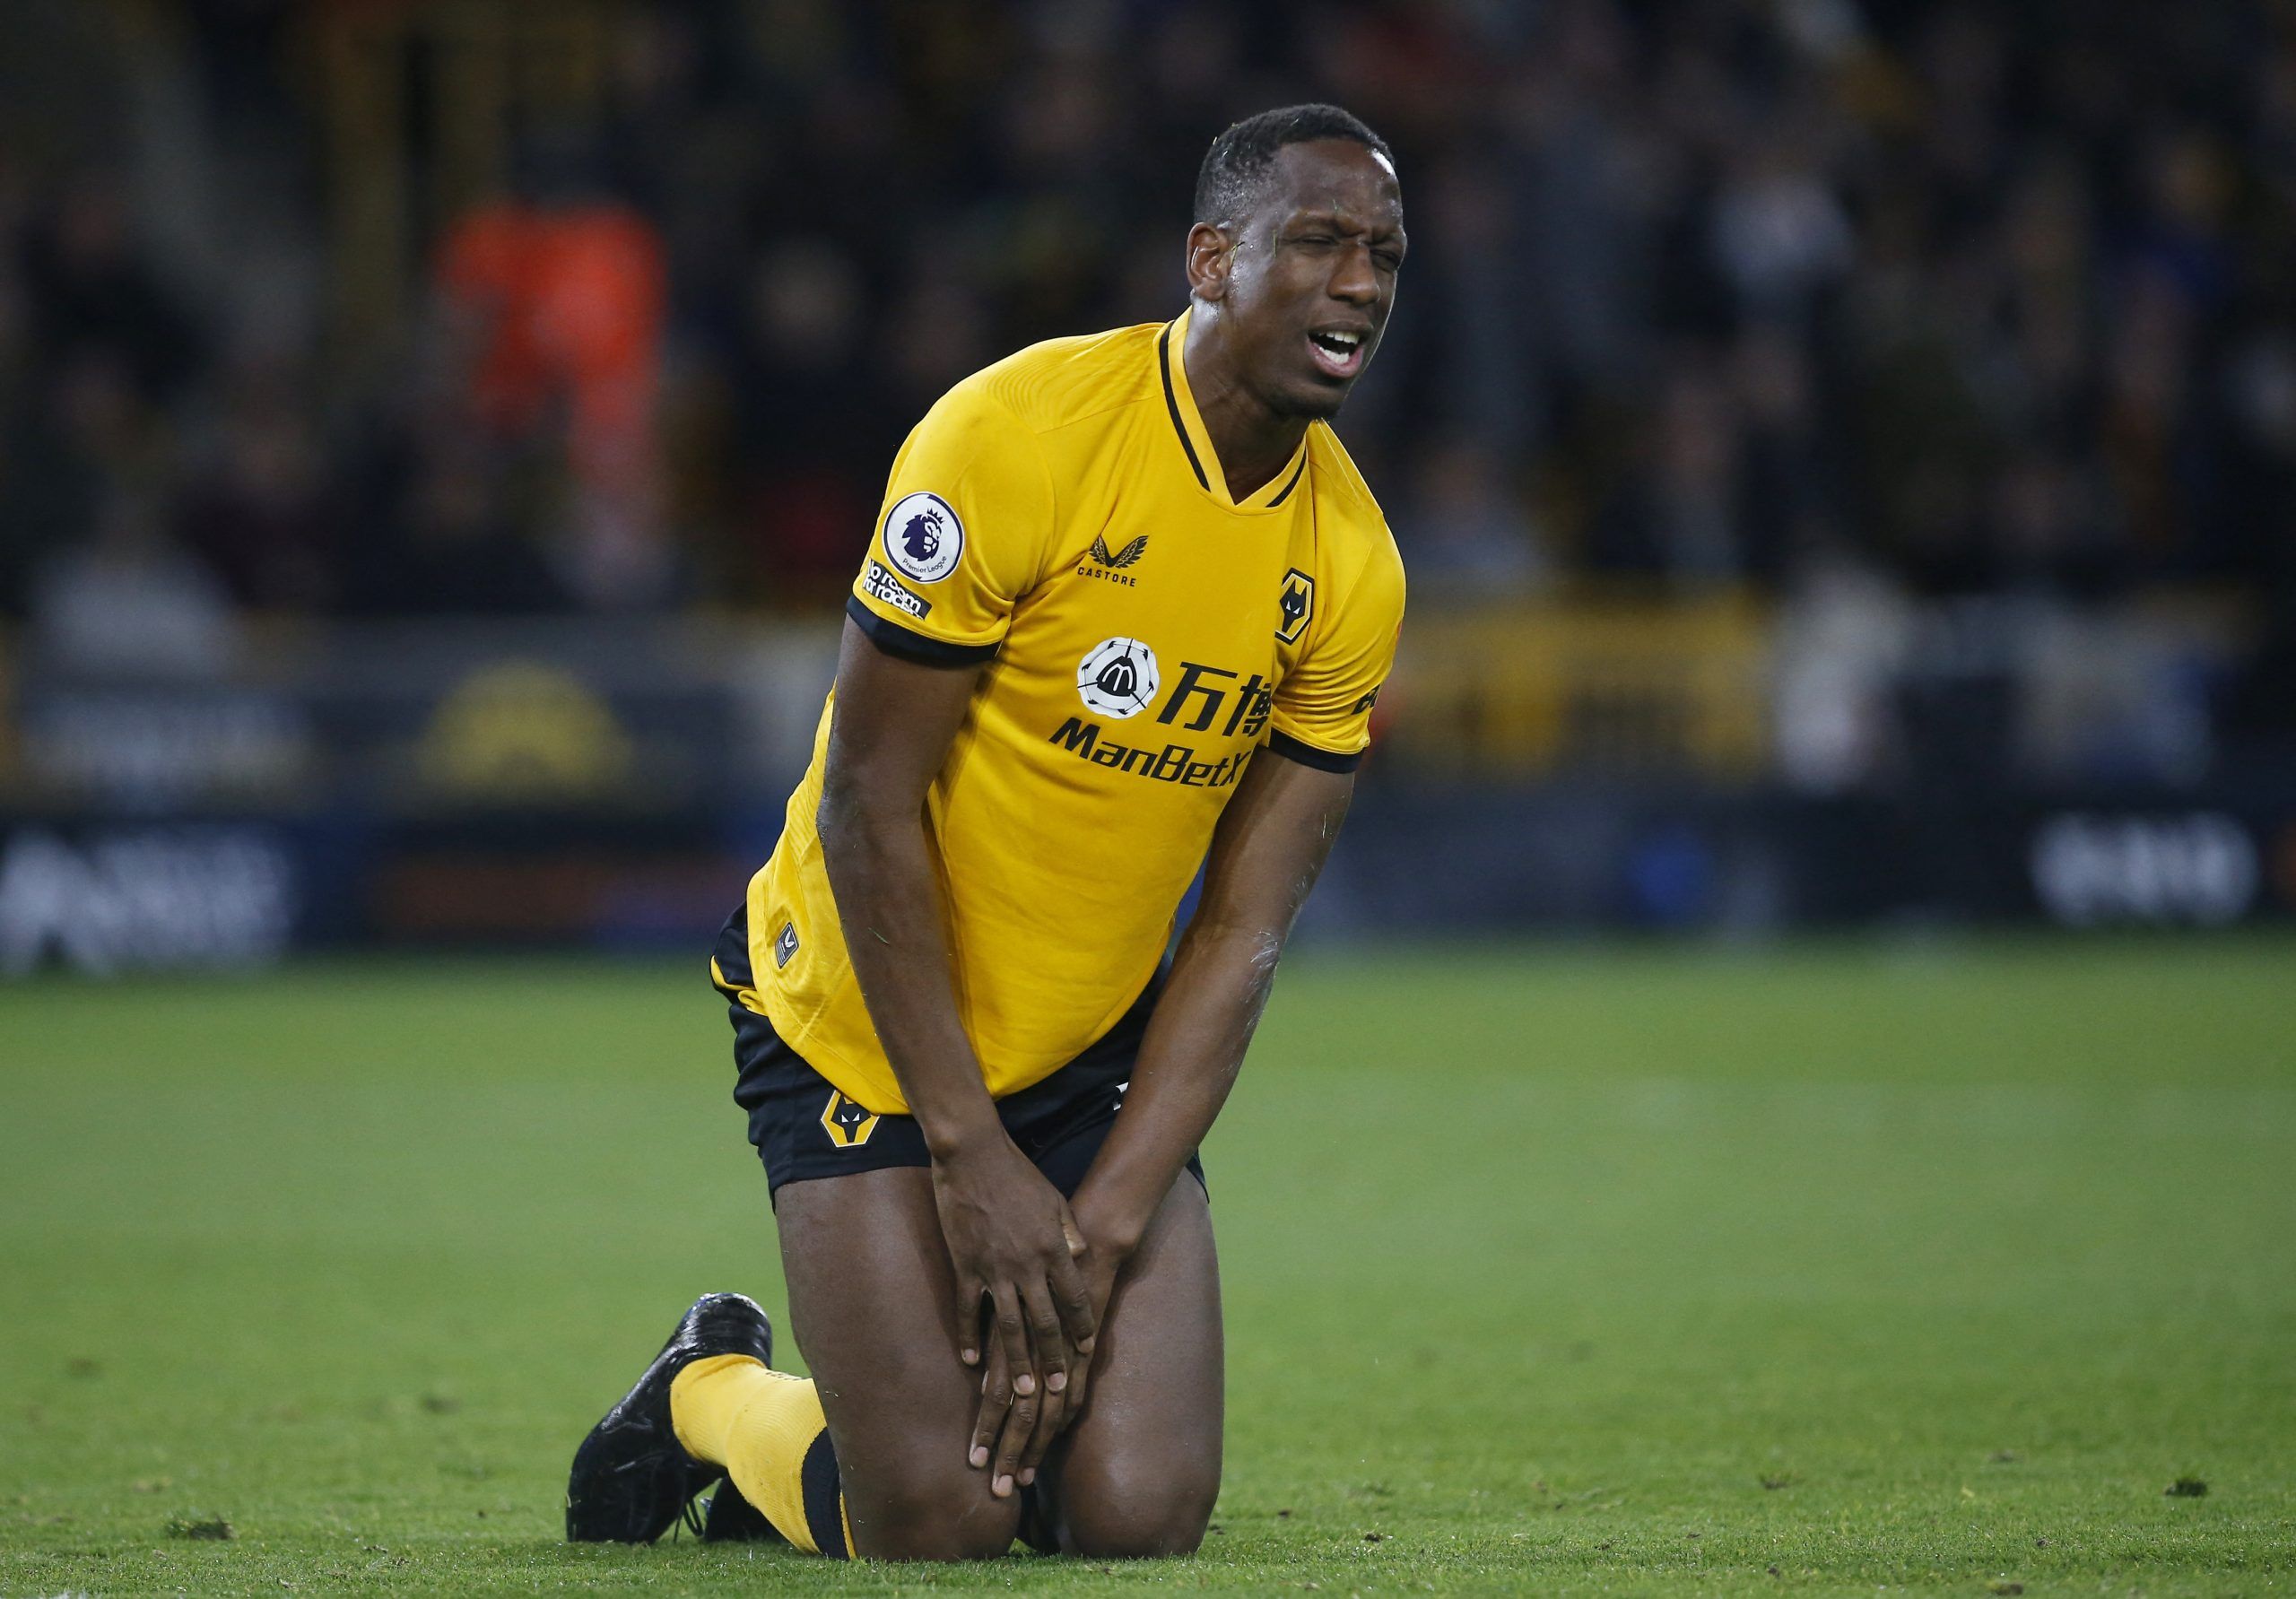 Nottingham Forest: Willy Boly transfer ‘really close’, personal terms agreed -Follow up